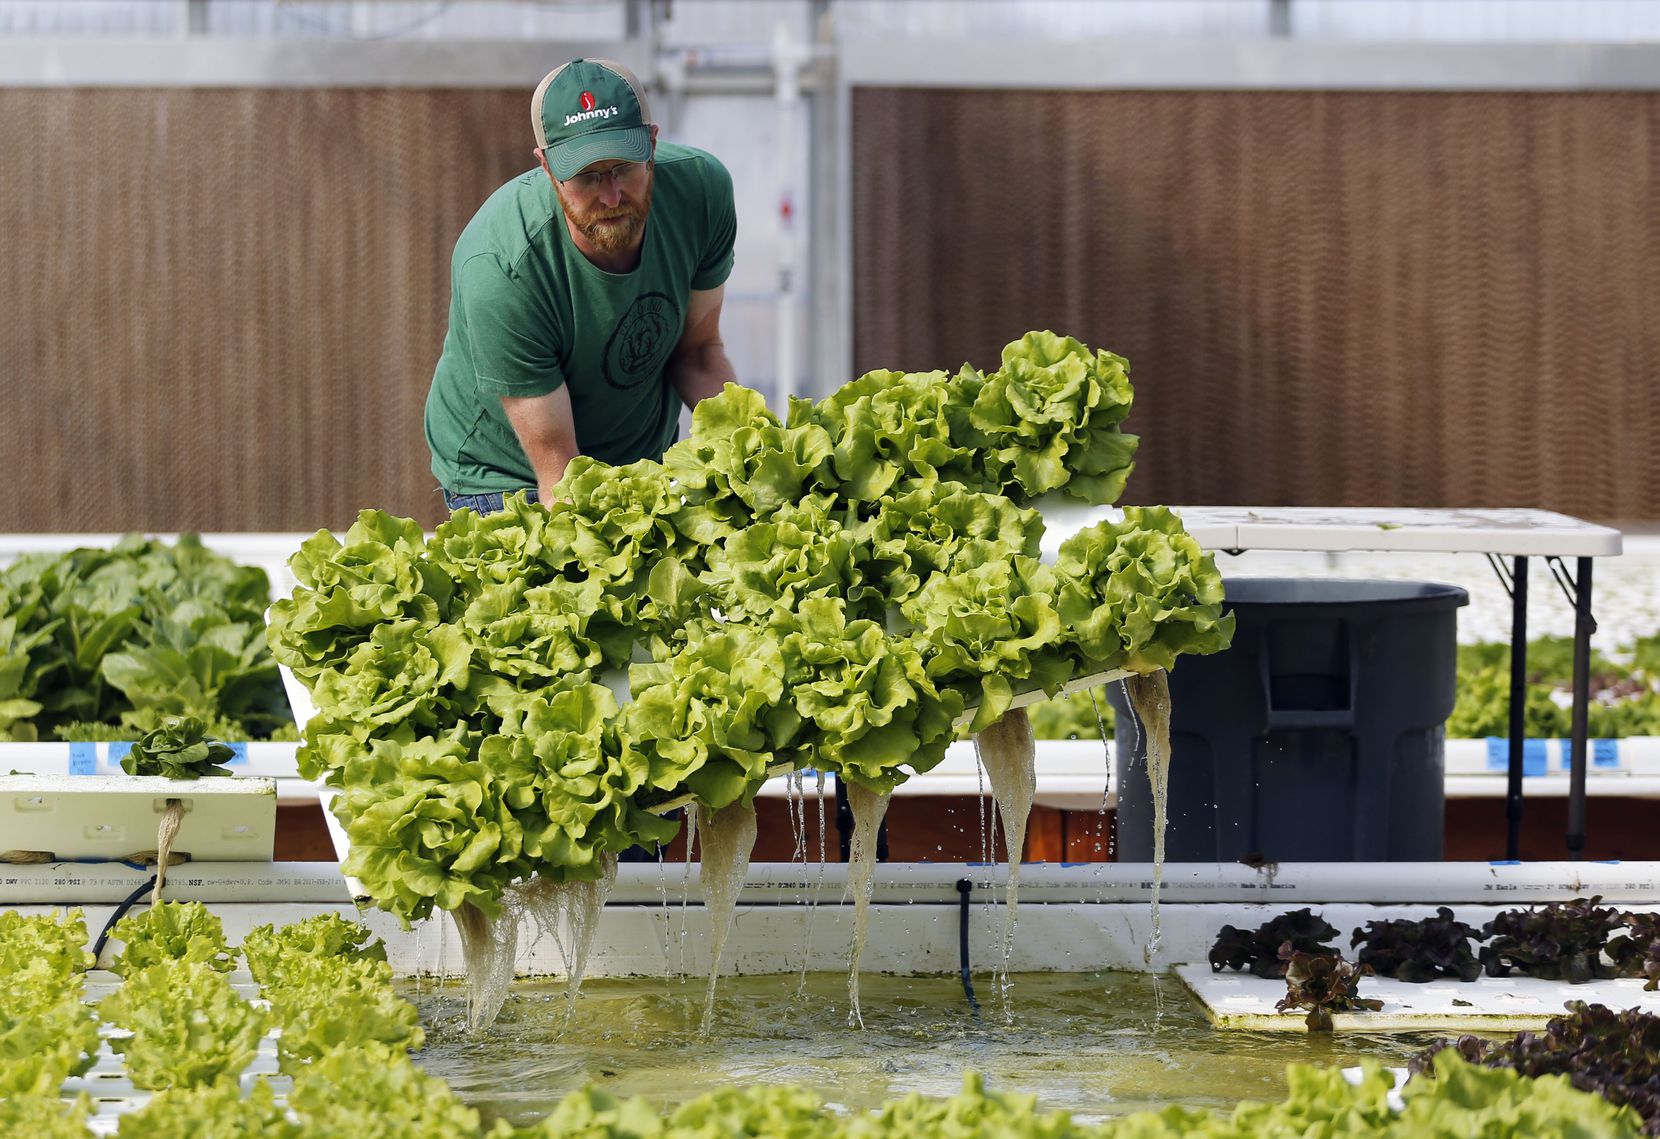 Profound Microfarms owner Jeff Bednar harvests lettuce at his greenhouse at Profound Microfarms in Lucas, Texas on Friday, October 27, 2017. 